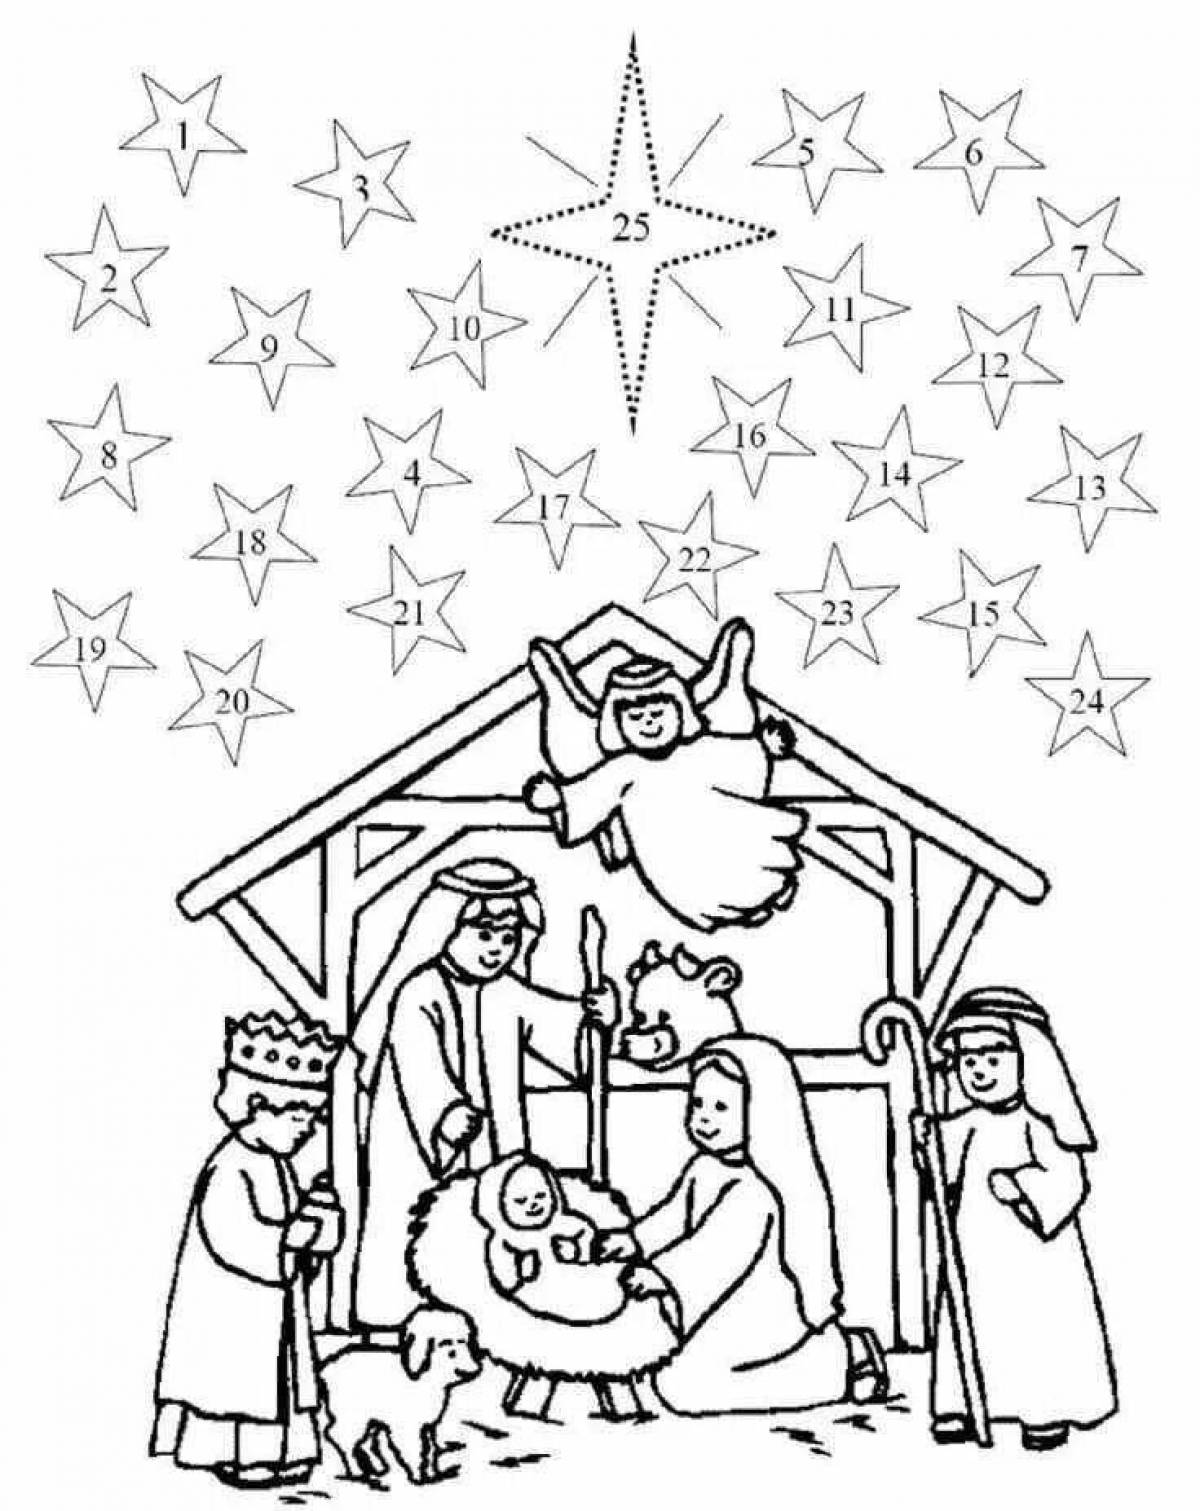 Magic Christmas coloring book for kids 6-7 years old